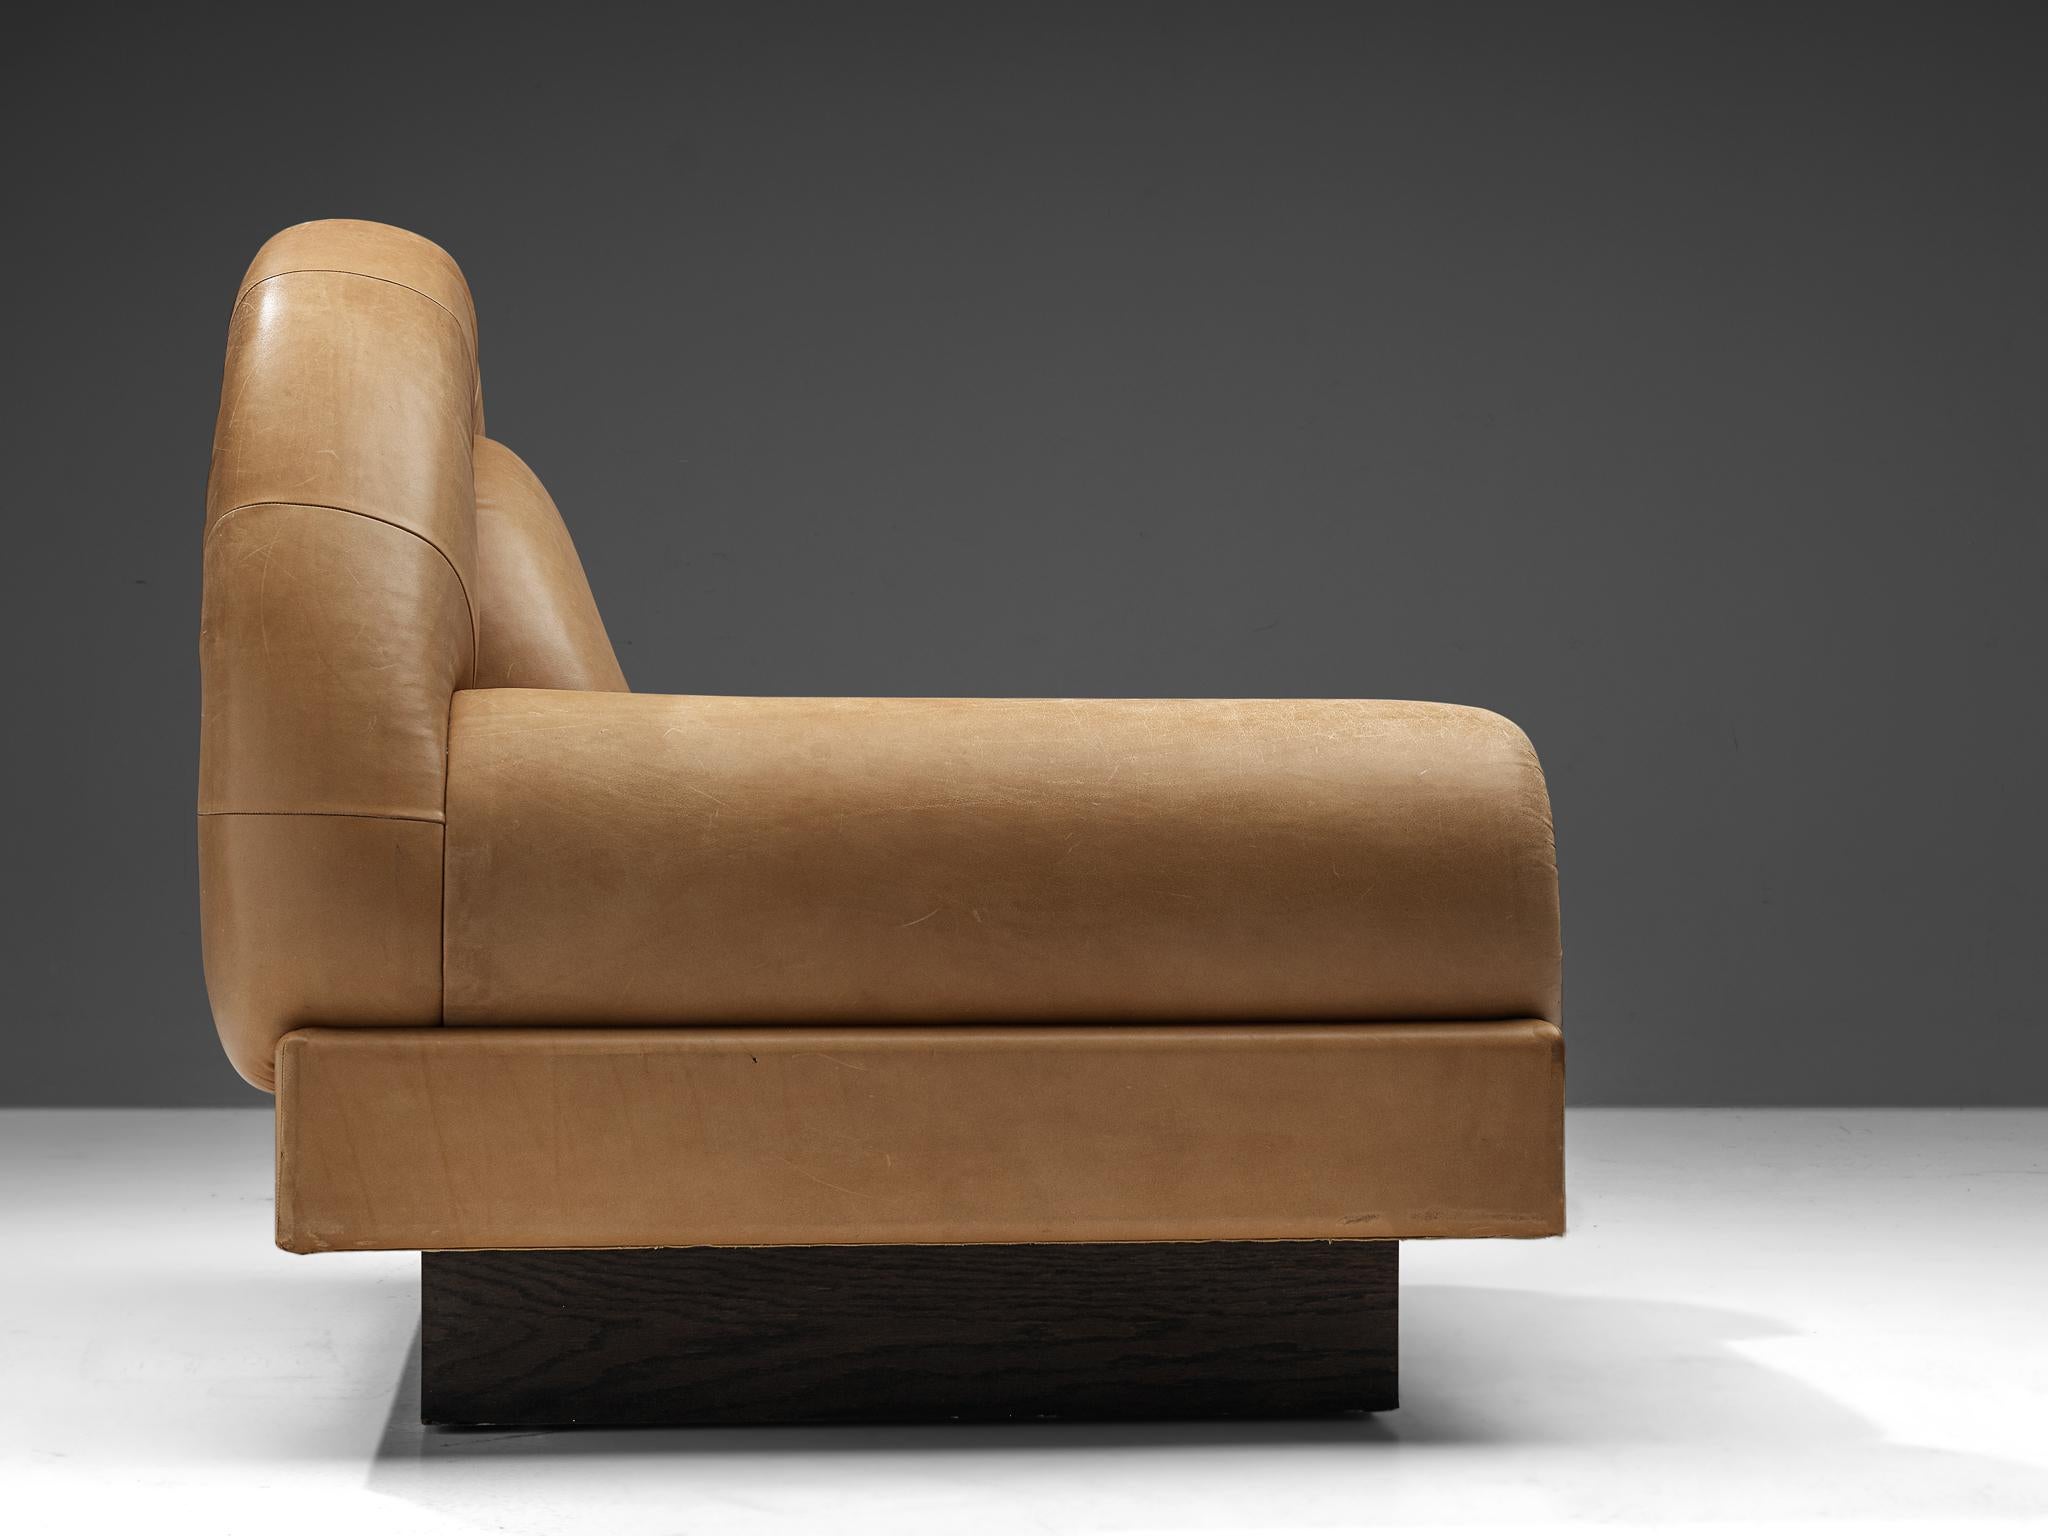 European Sculptural Lounge Chair in Brown Leather